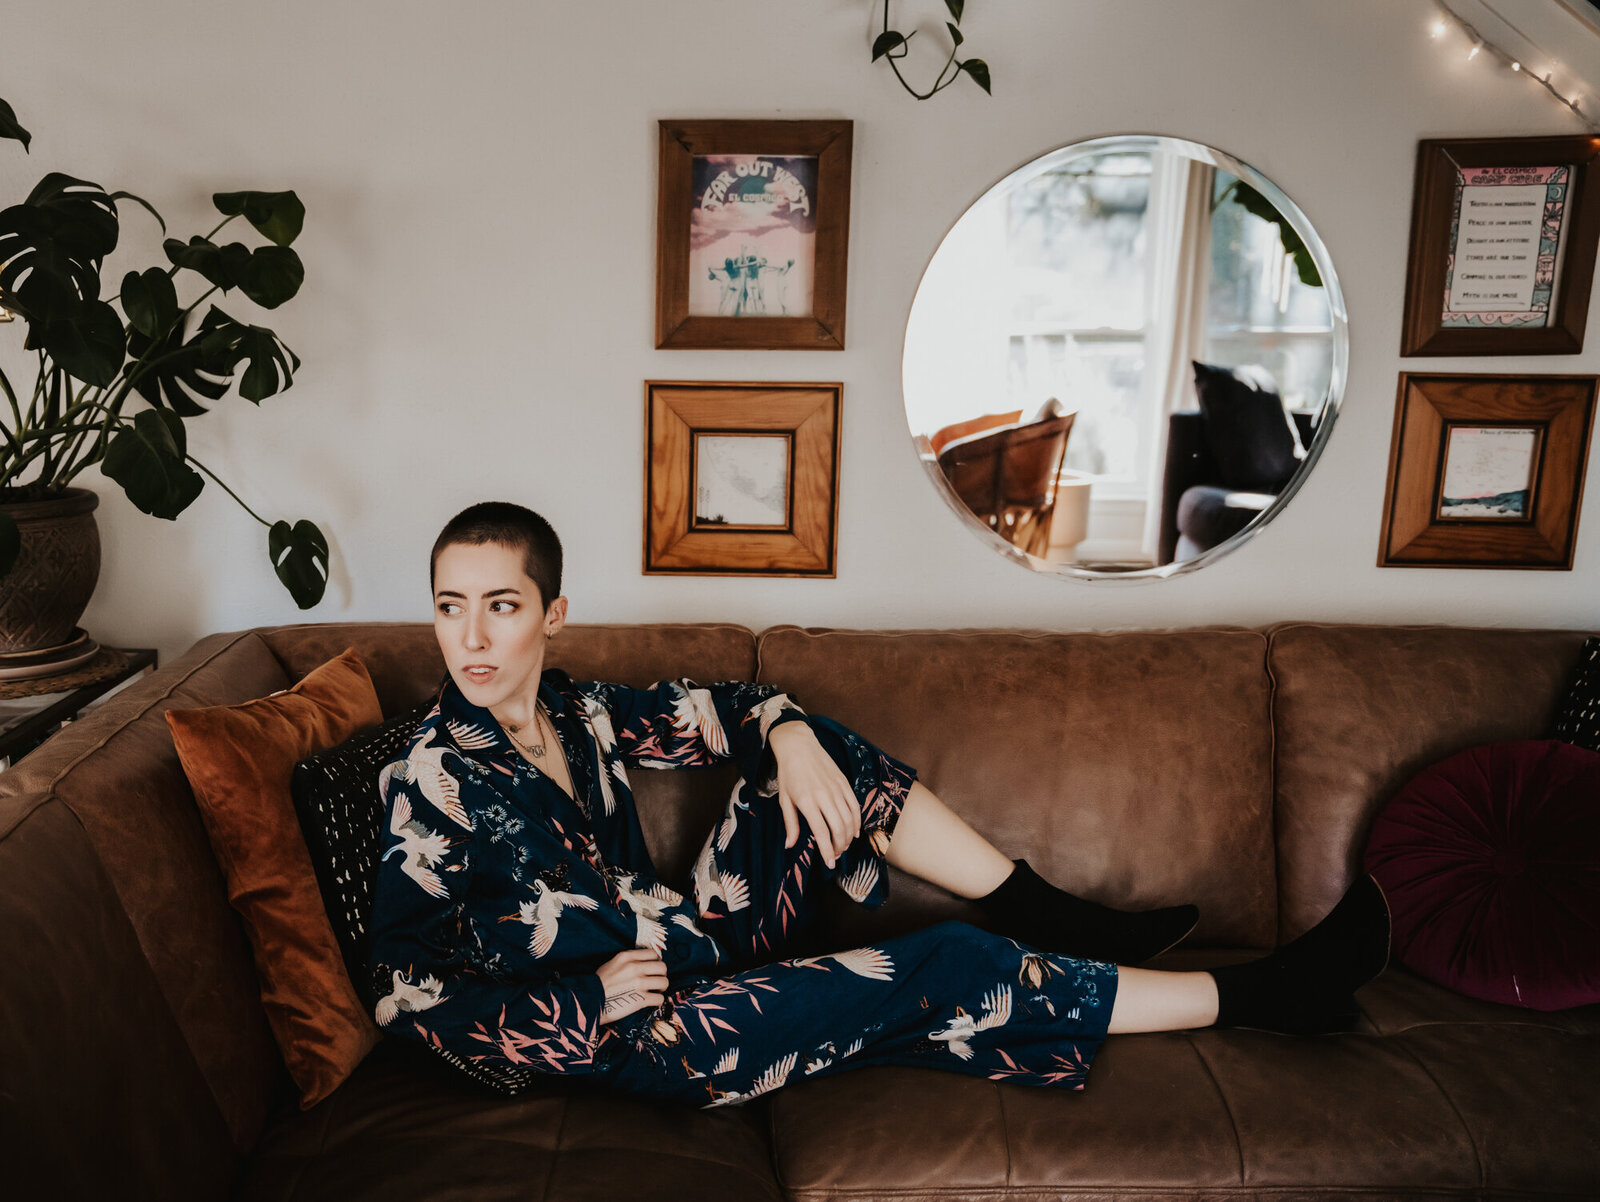 Branding Photographer, a woman reclines on the couch wearing kimono style clothing